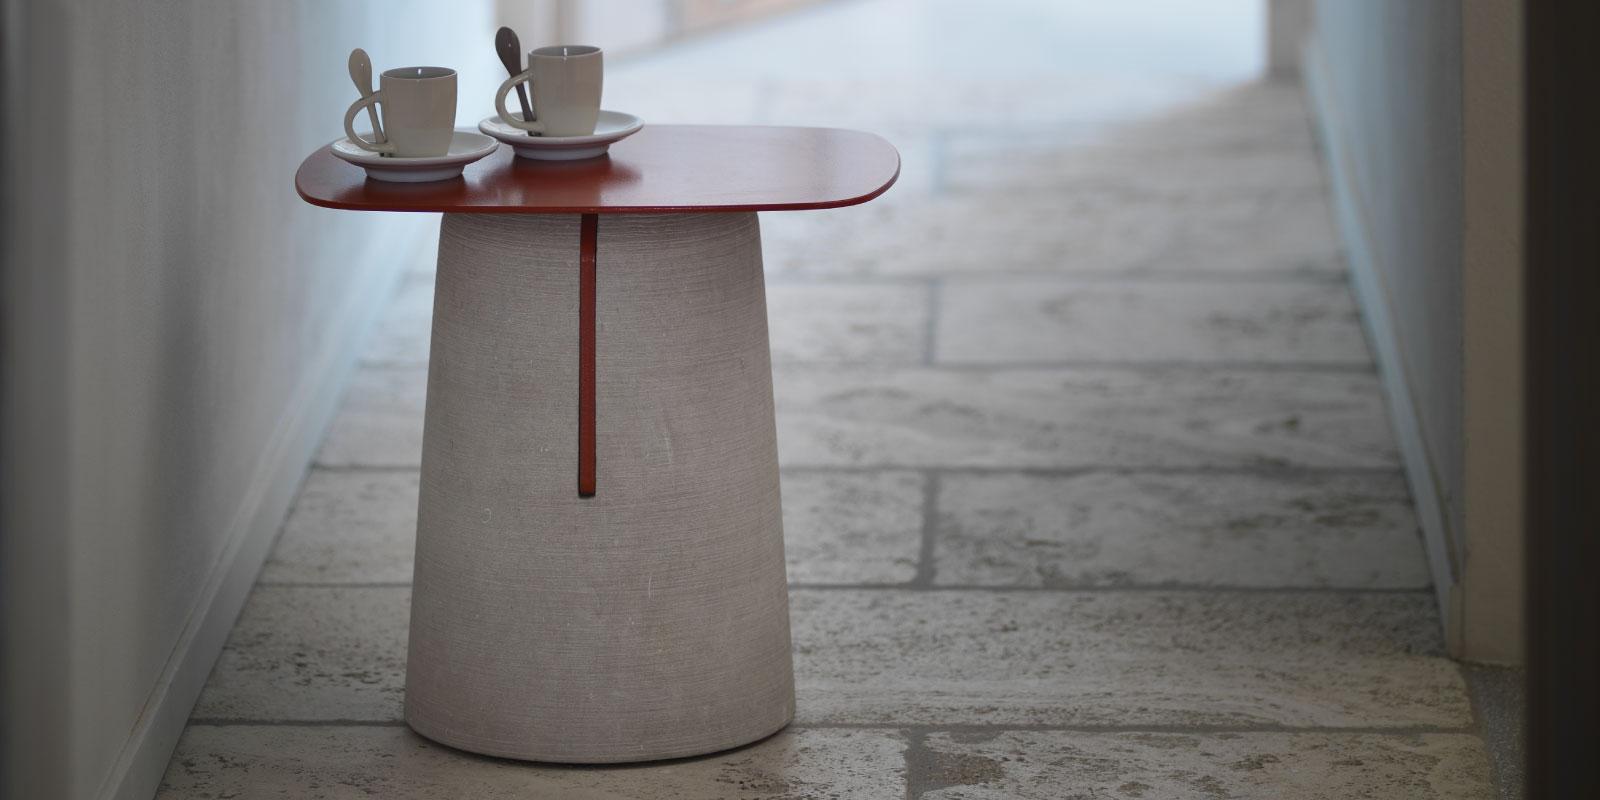 The Piro collection by Lucidi & Pevere crafted by Pimar Italy, a convenient
side table with a cylindrical form slightly domed.
It is available in Italian natural limestone from Puglia, Italy, in beige coloring and “piromafo” stone. The steel